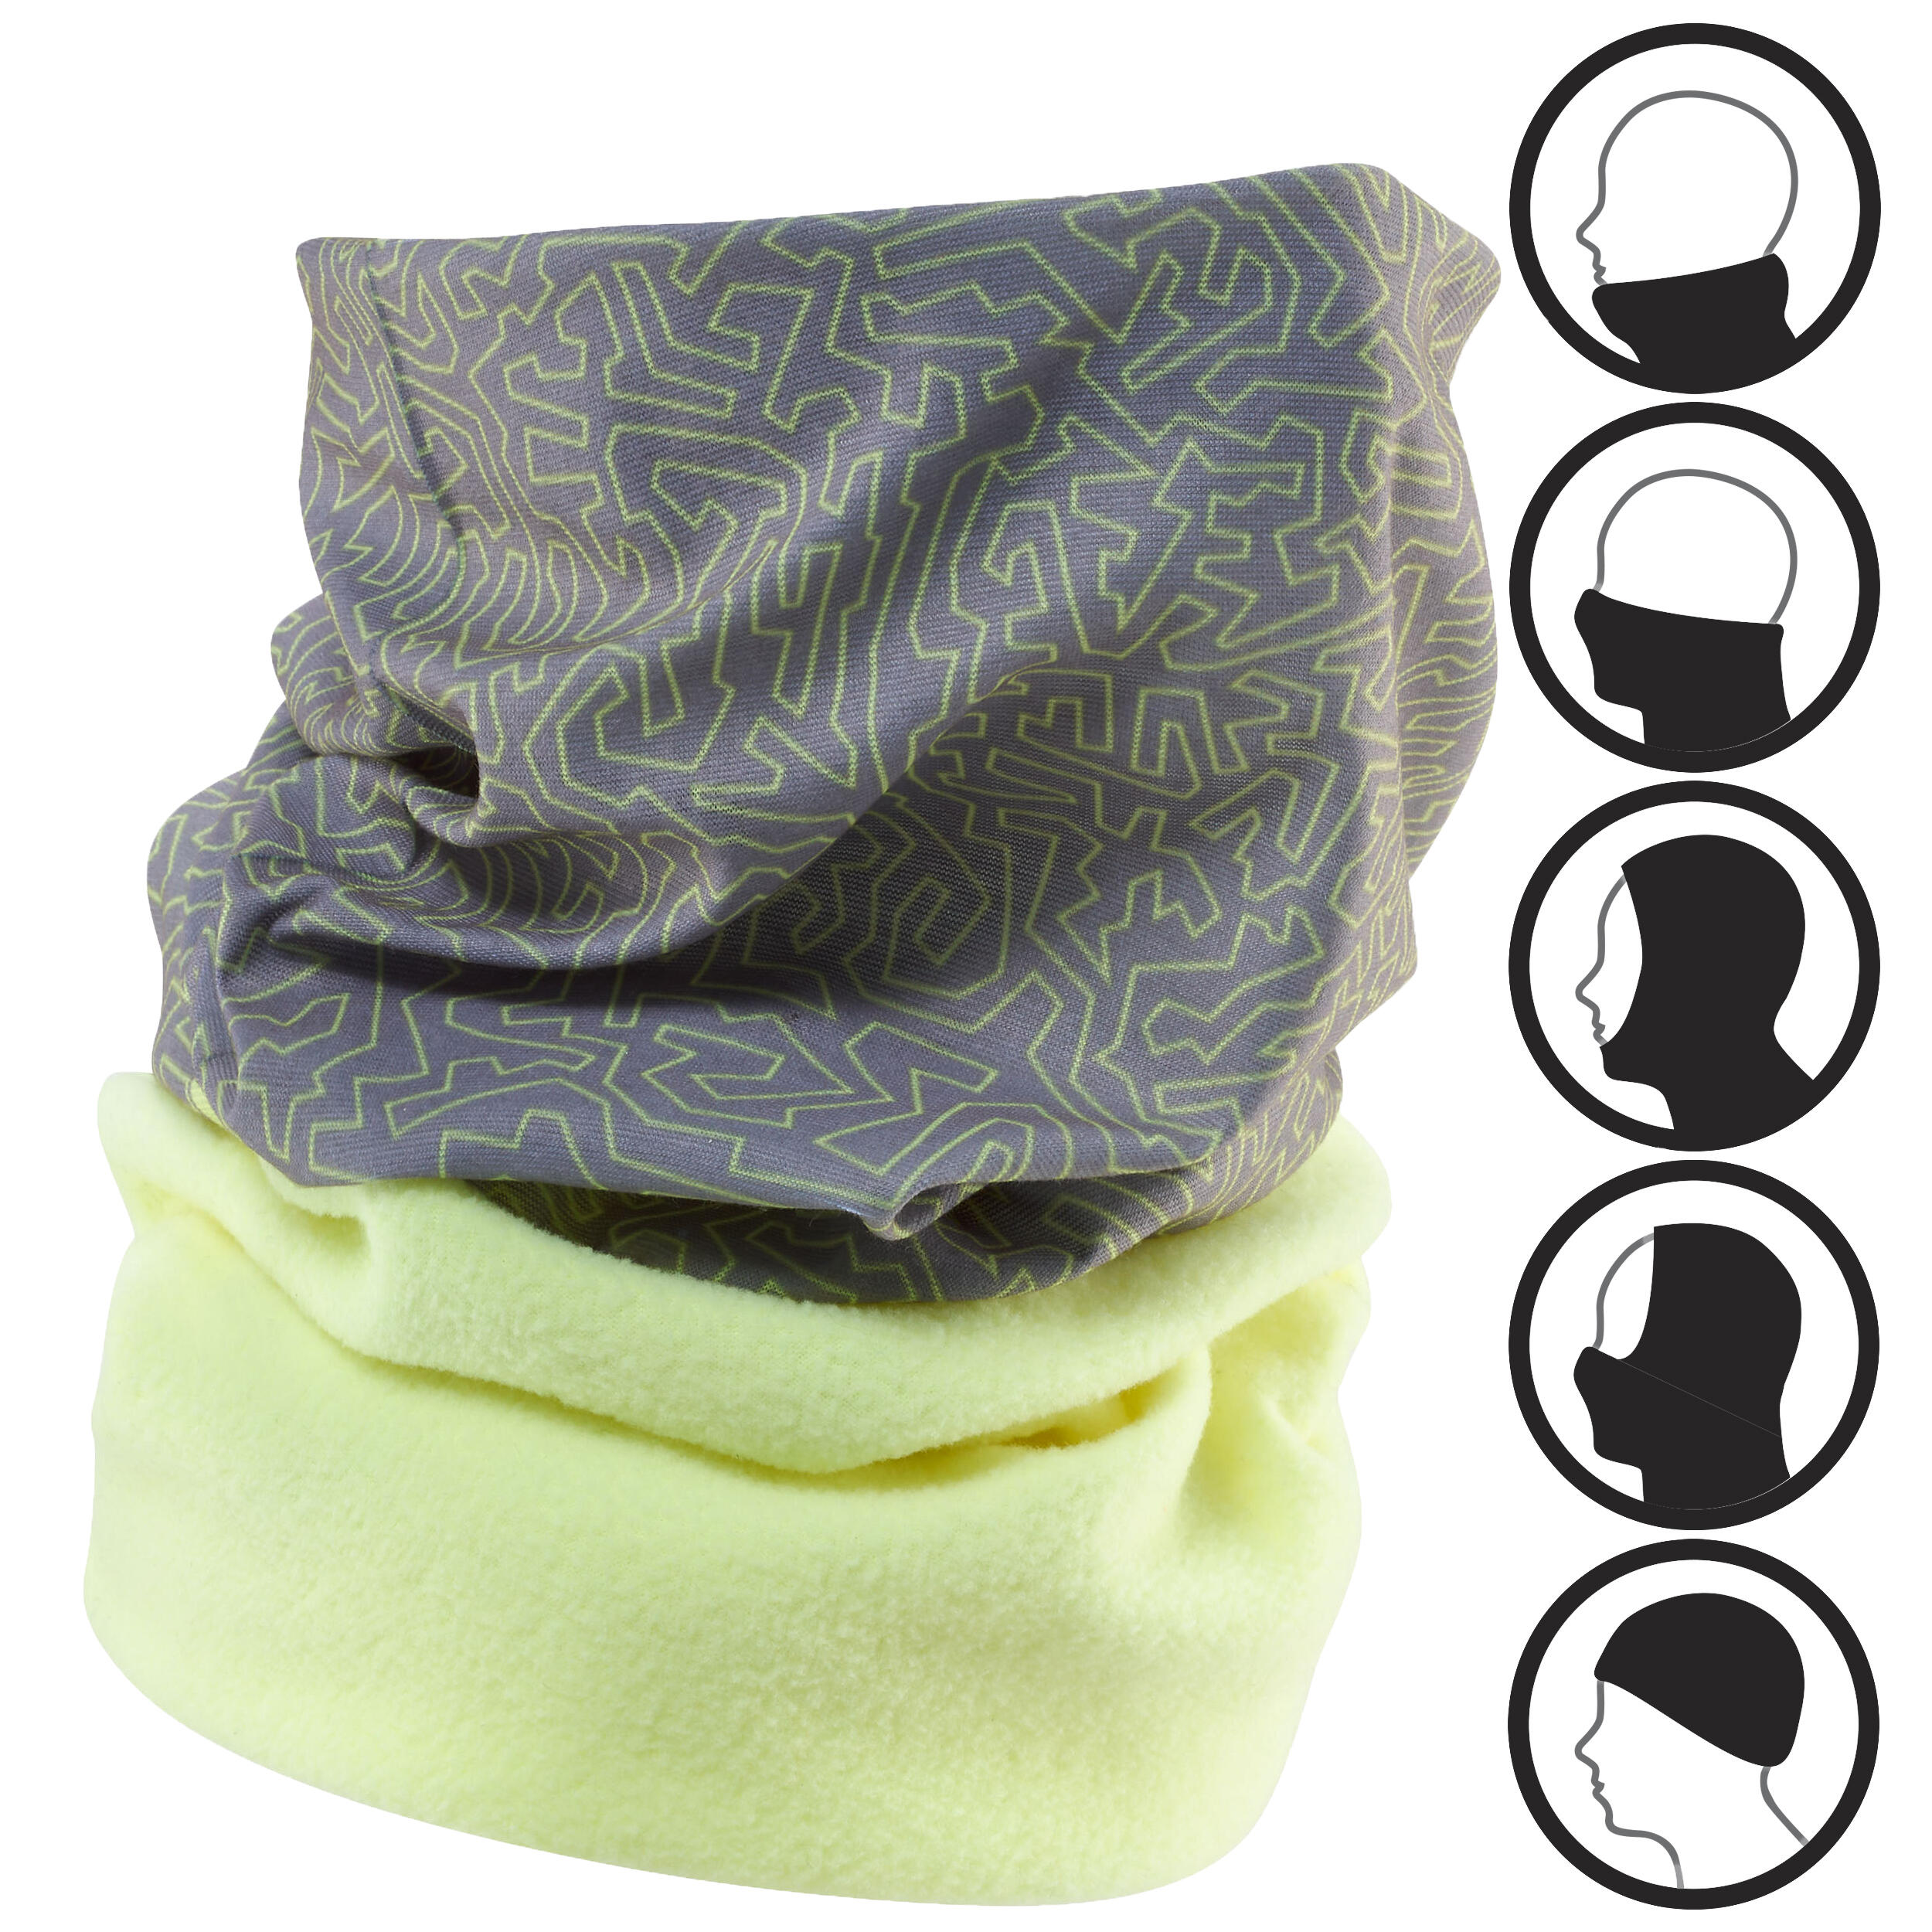 HIKEY Face Scarf Headwrap Neckwarmer Breathable Face Shield Winter Windproof warmth Bandanas for Sports Outdoors 